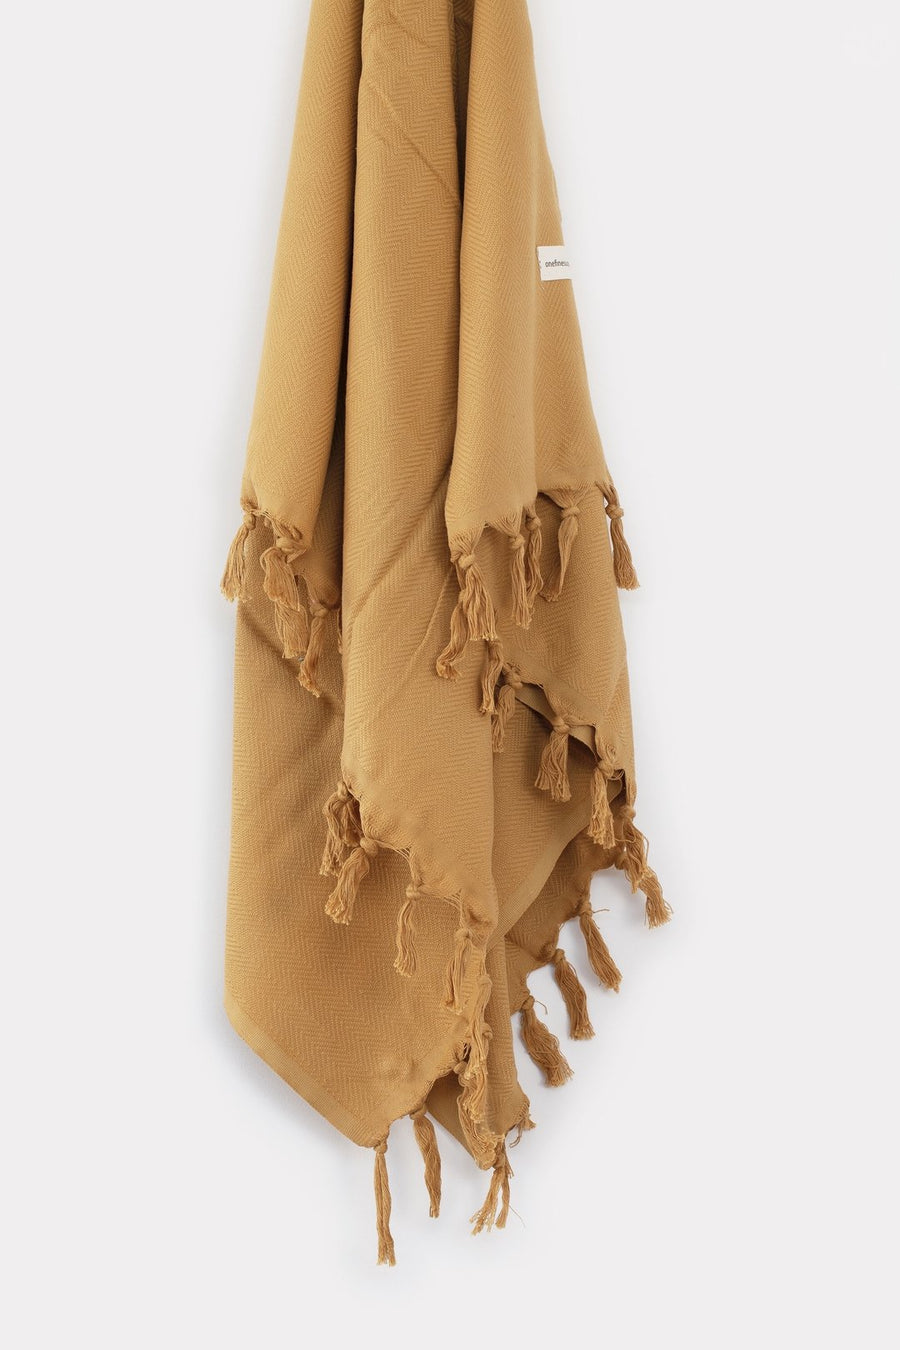 Onefinesunday Co - Signature Turkish Towels in Mustard